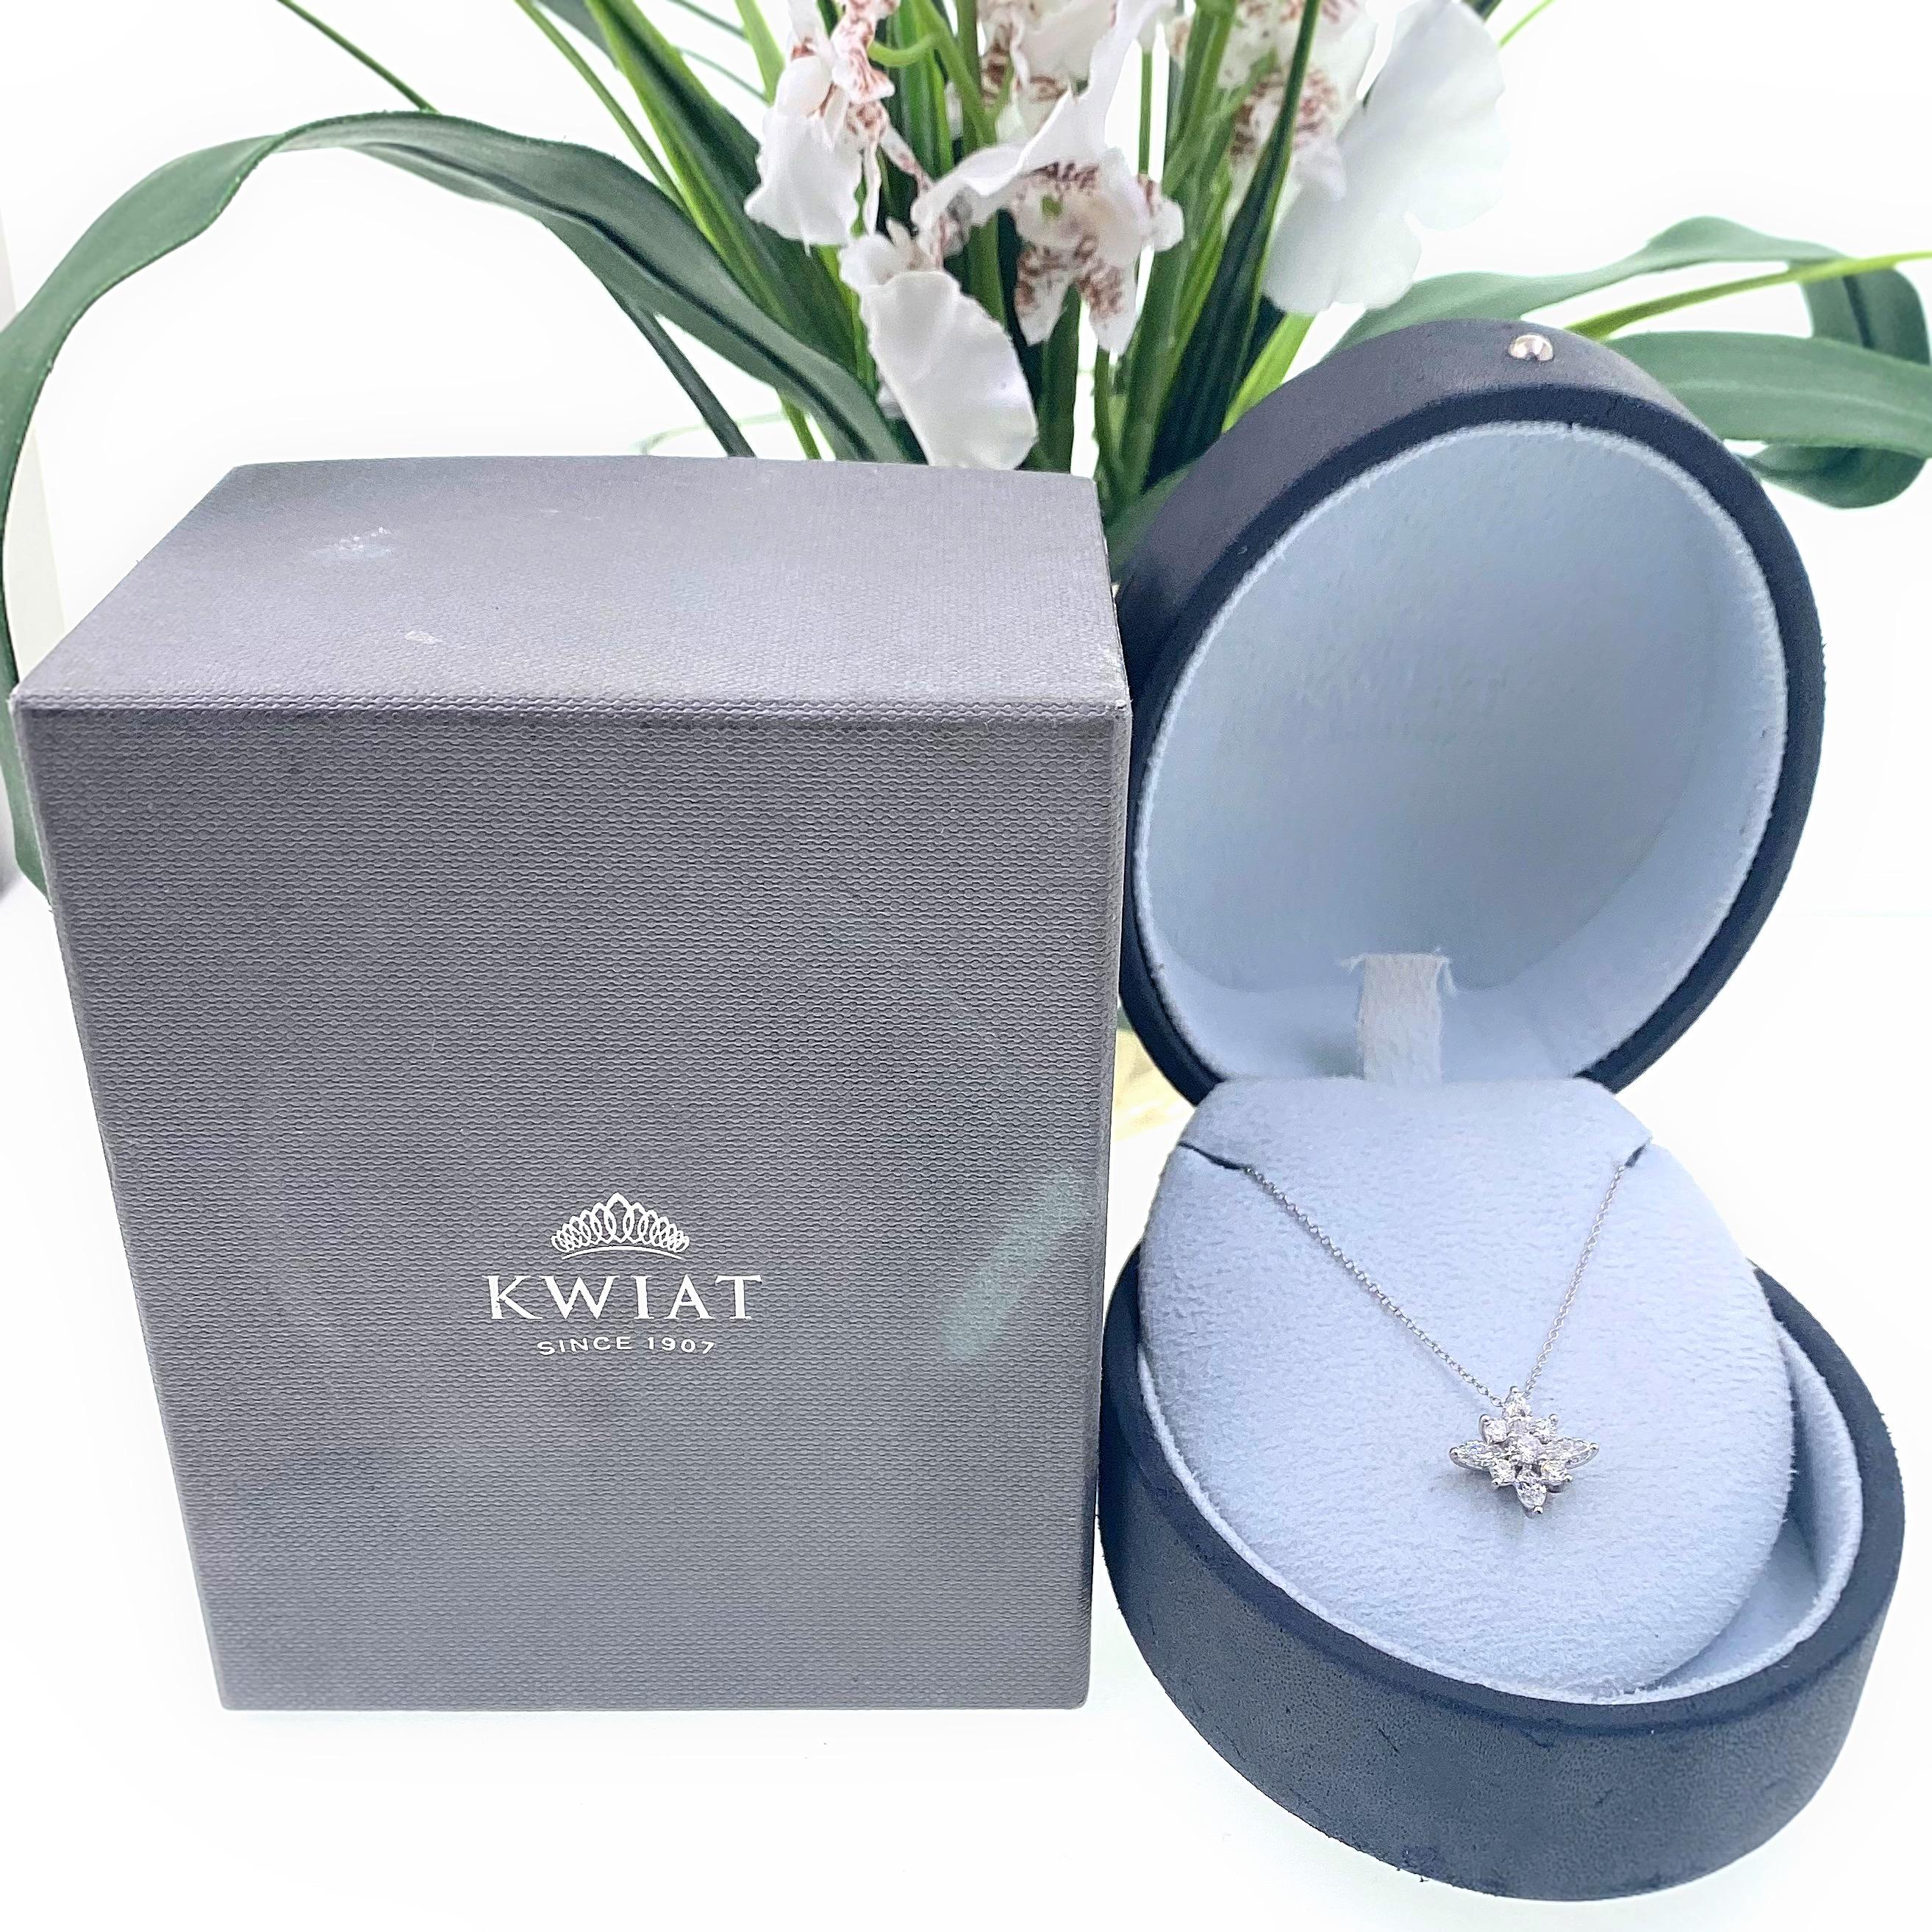 KWIAT Star Collection Pendant Necklace
Style:  Pendant Necklace
Ref. number:  106101
Metal:   Platinum PT950
Size:  Large 17' Inch Chain
TCW:  0.93 tcw
Main Diamond:  5 Round Brilliant Cut Diamonds with 4 Marquise Cut Diamonds
Color & Clarity:  G -